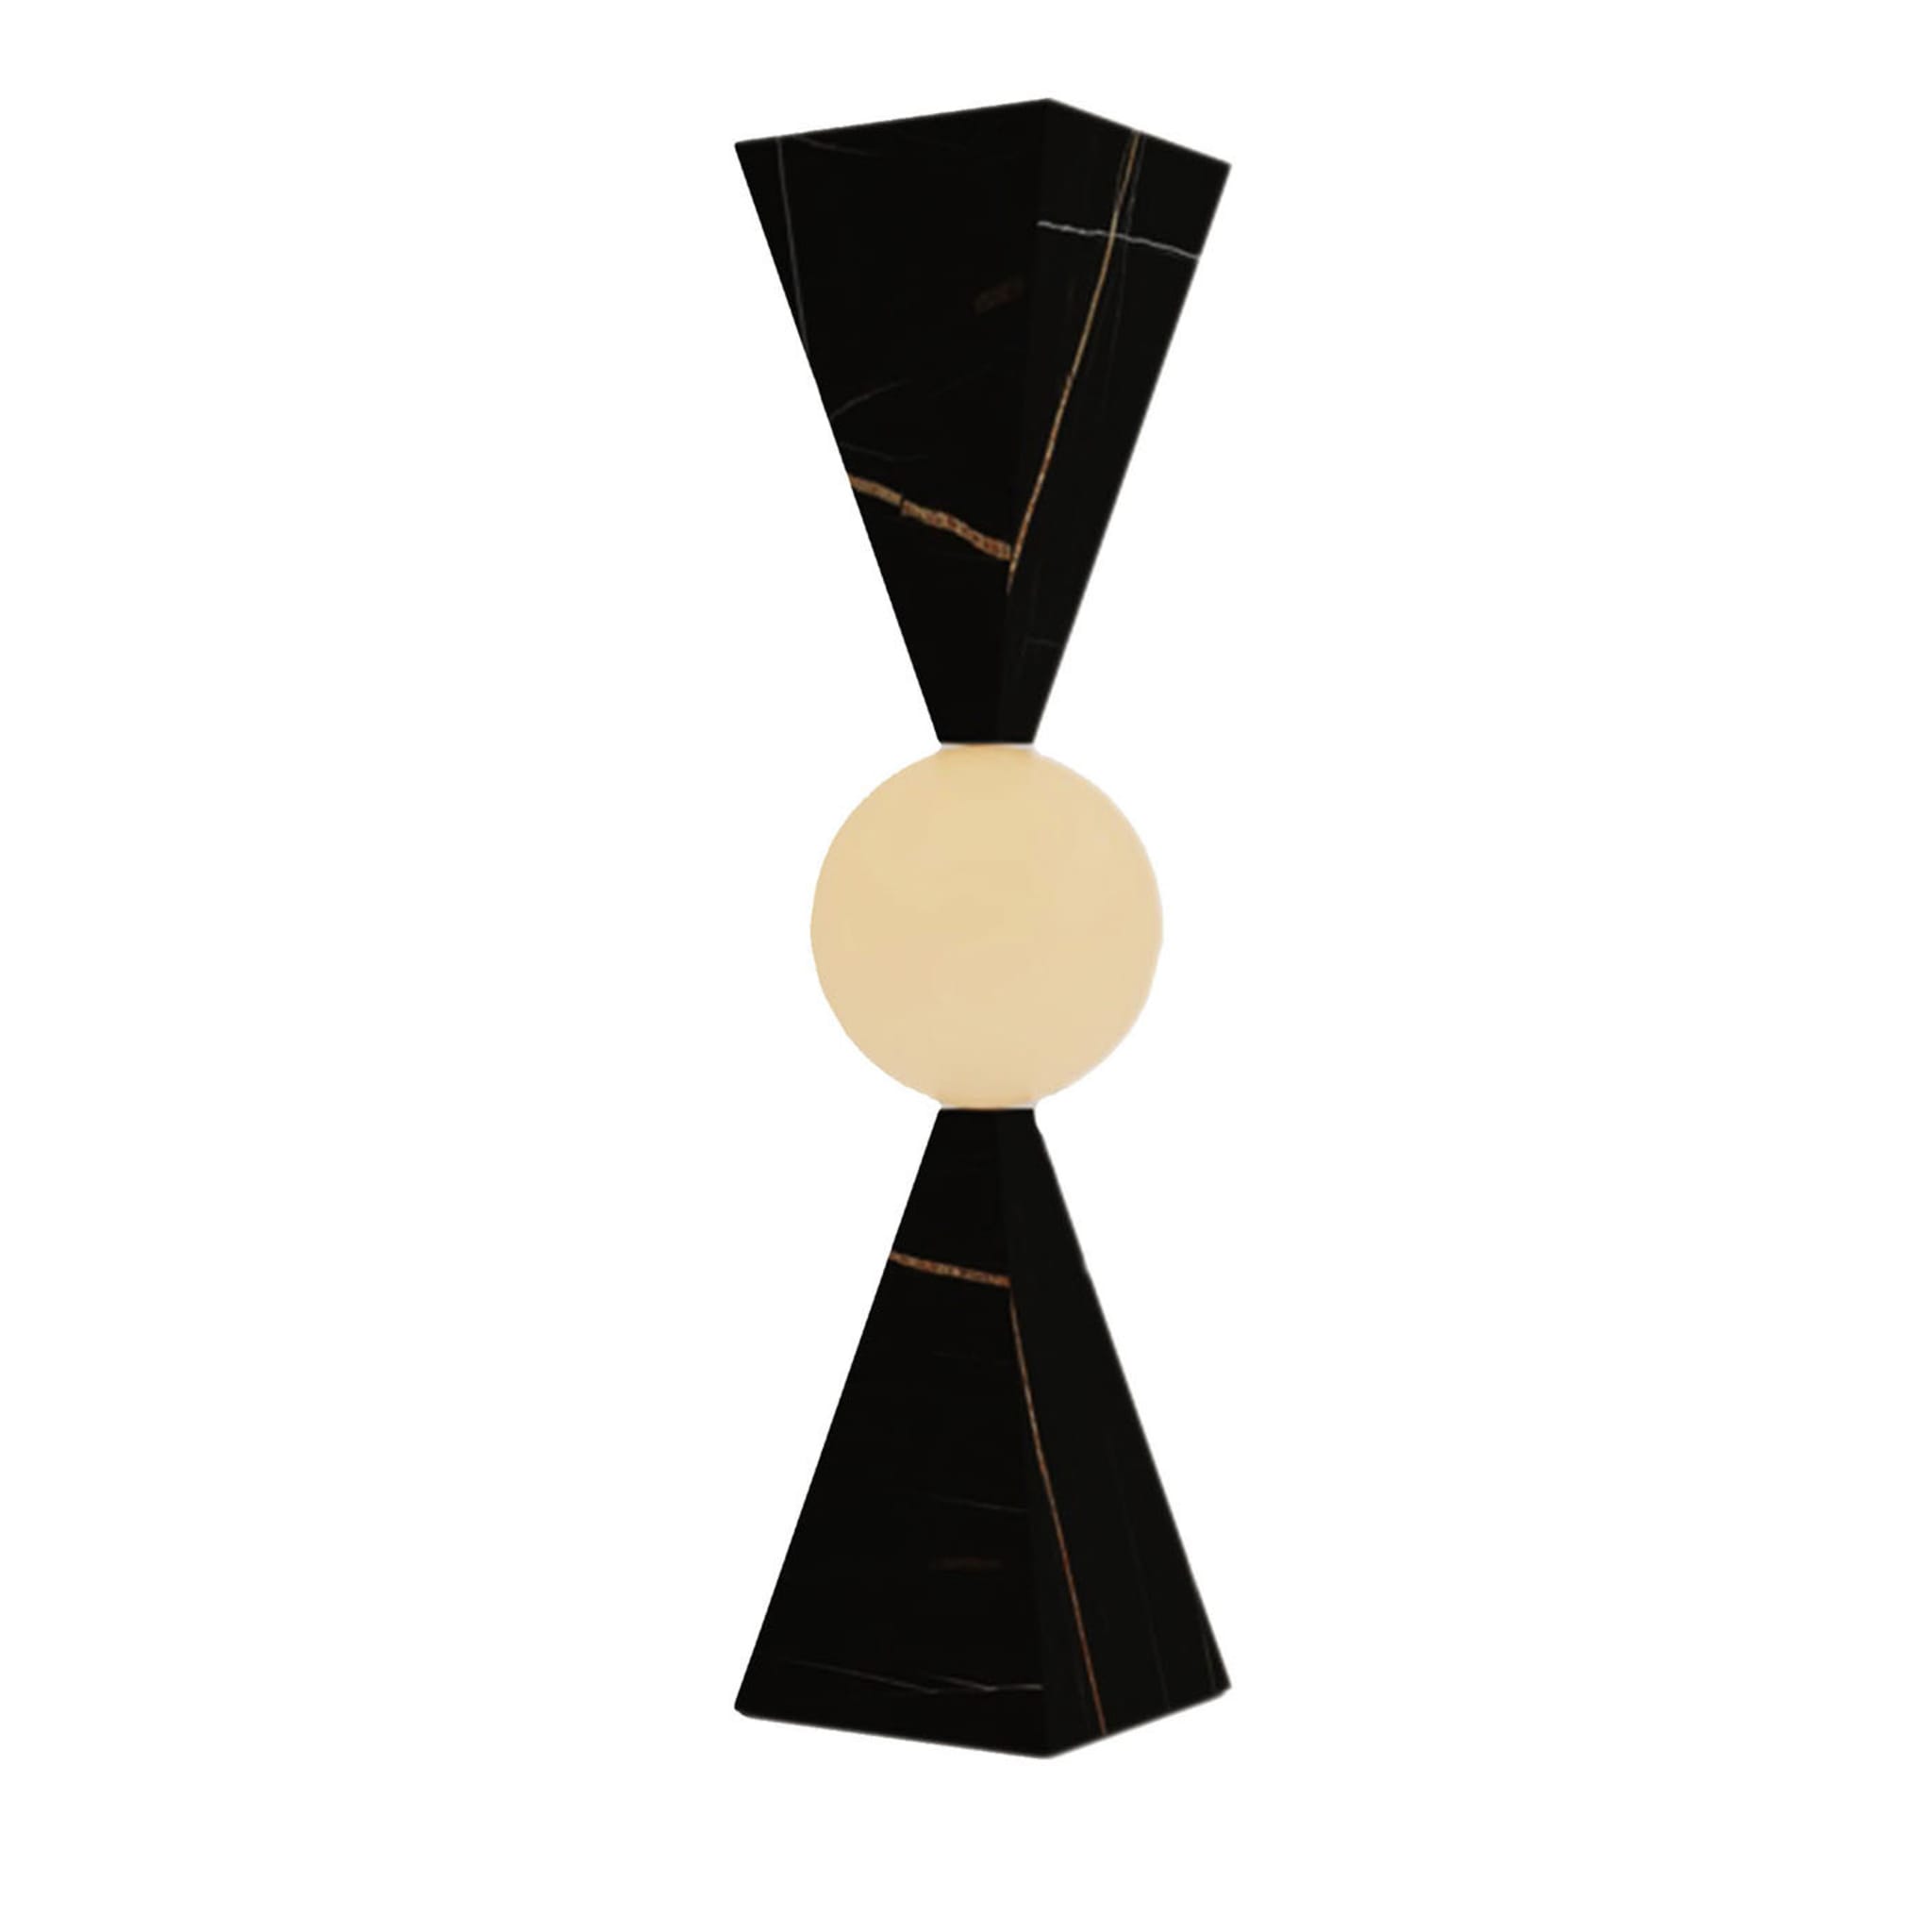 Clessidra Table Lamp in Sahara Noir Marble by sid&sign - Main view